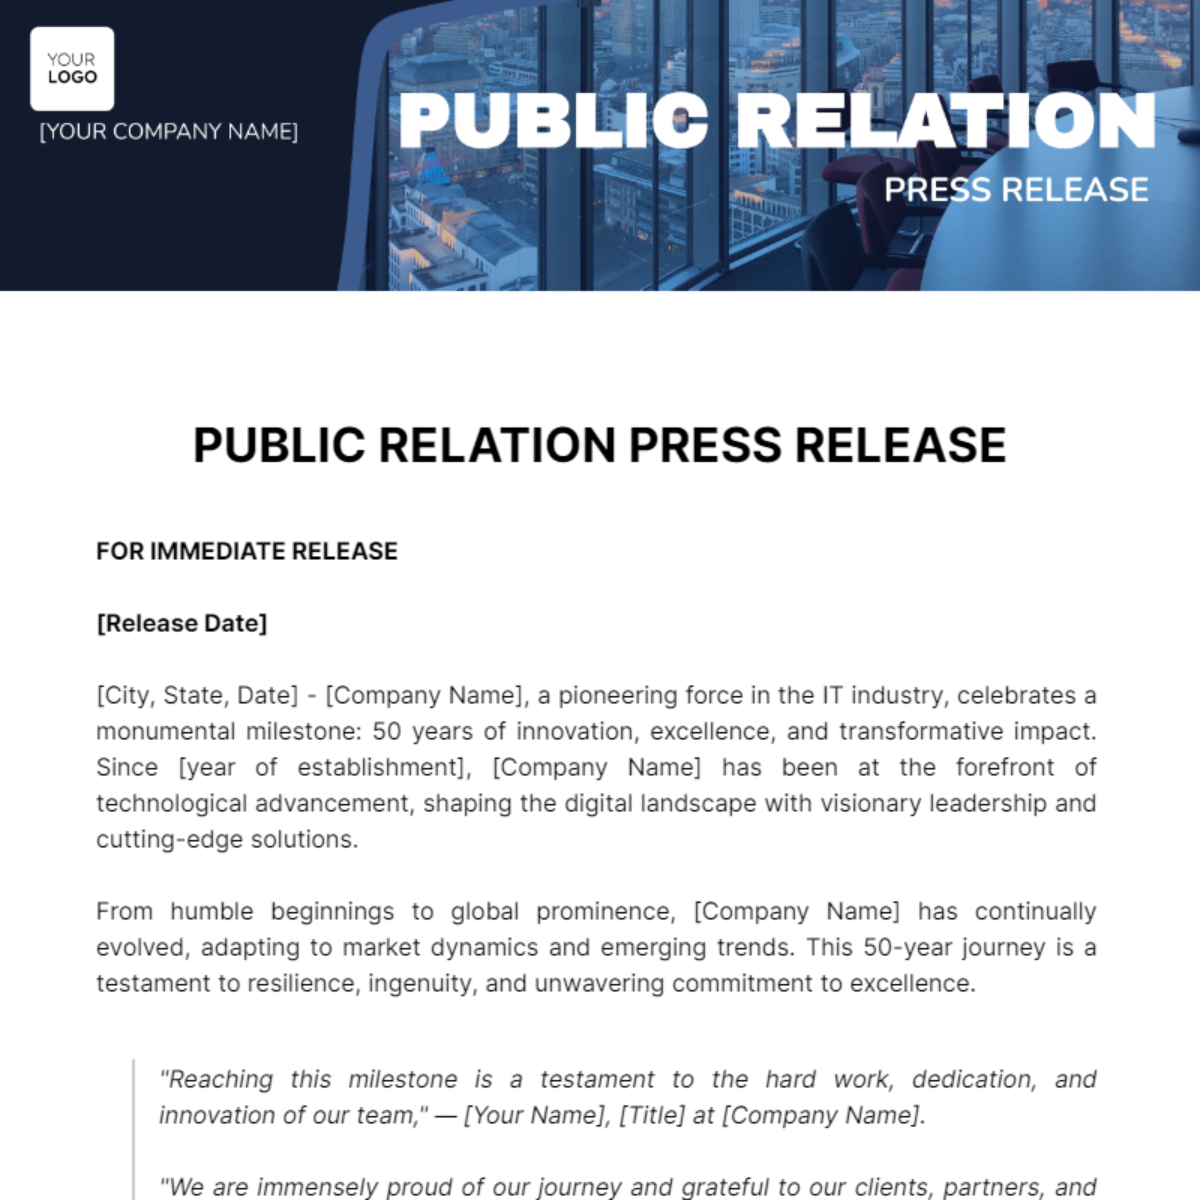 Free Public Relations Press Release Template